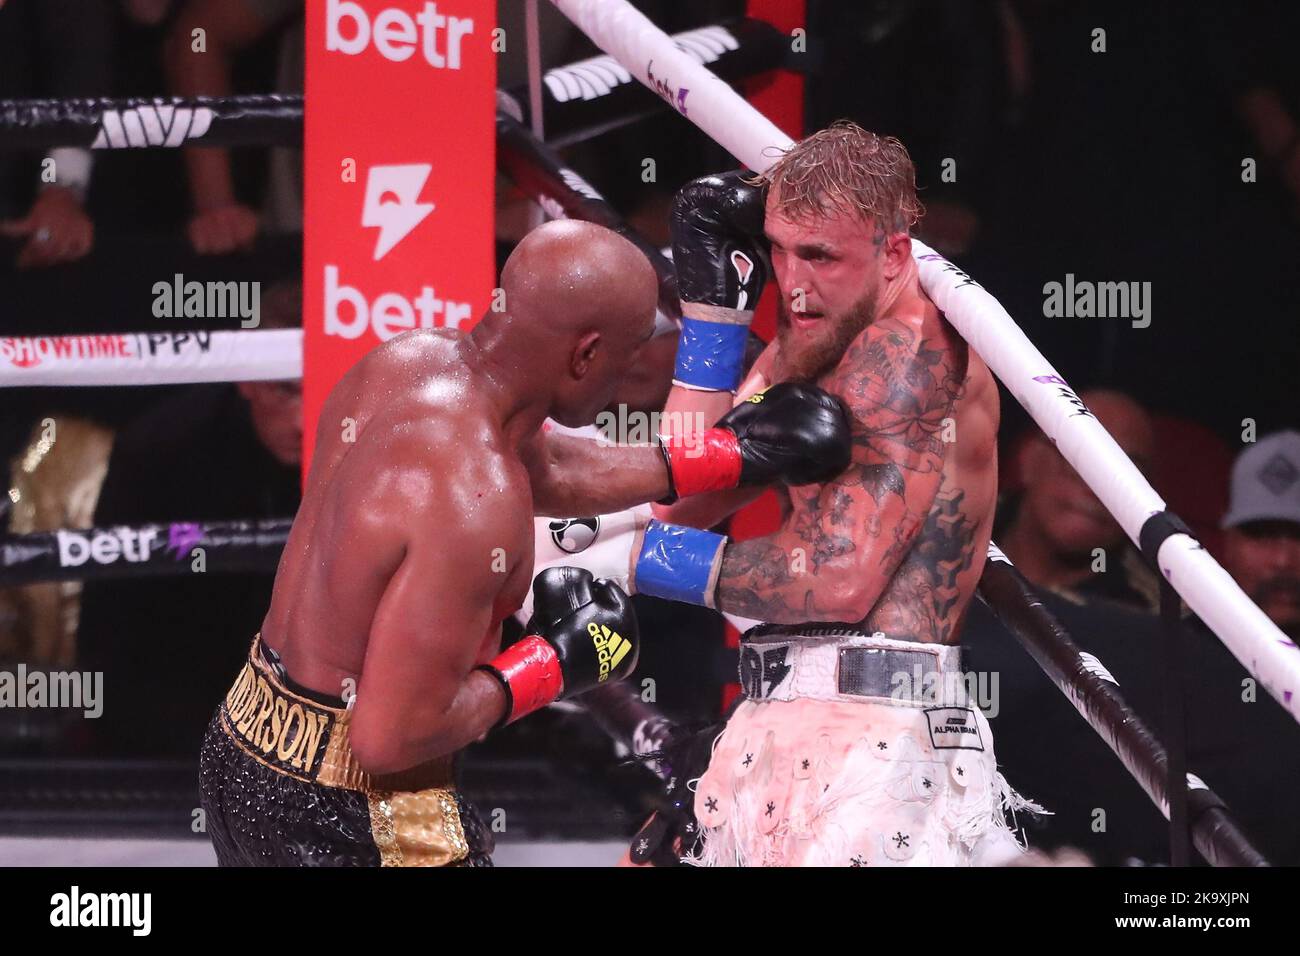 GLENDALE, AZ - OCTOBER 29: Jake Paul and Anderson Silva meet in the boxing ring for their Cruiserweight bout at Showtime’s Paul vs Silva PPV Event at the Desert Diamond Arena on October 29, 2022 in Glendale, Arizona, United States.(Photo by Alejandro Salazar/PxImages) Stock Photo